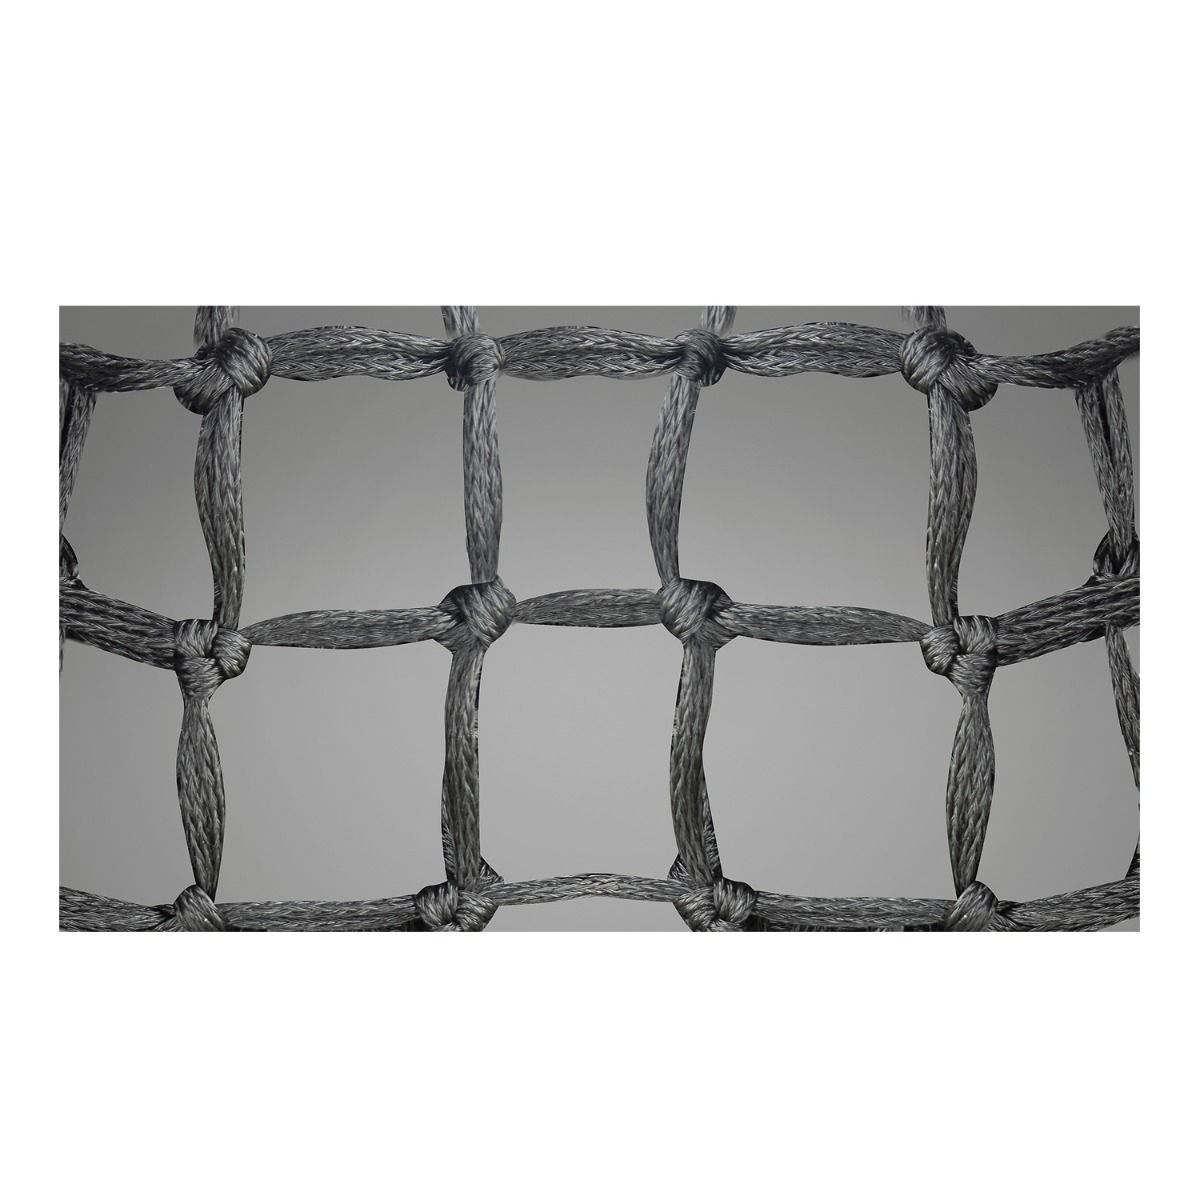 COMPETITION TENNIS NET